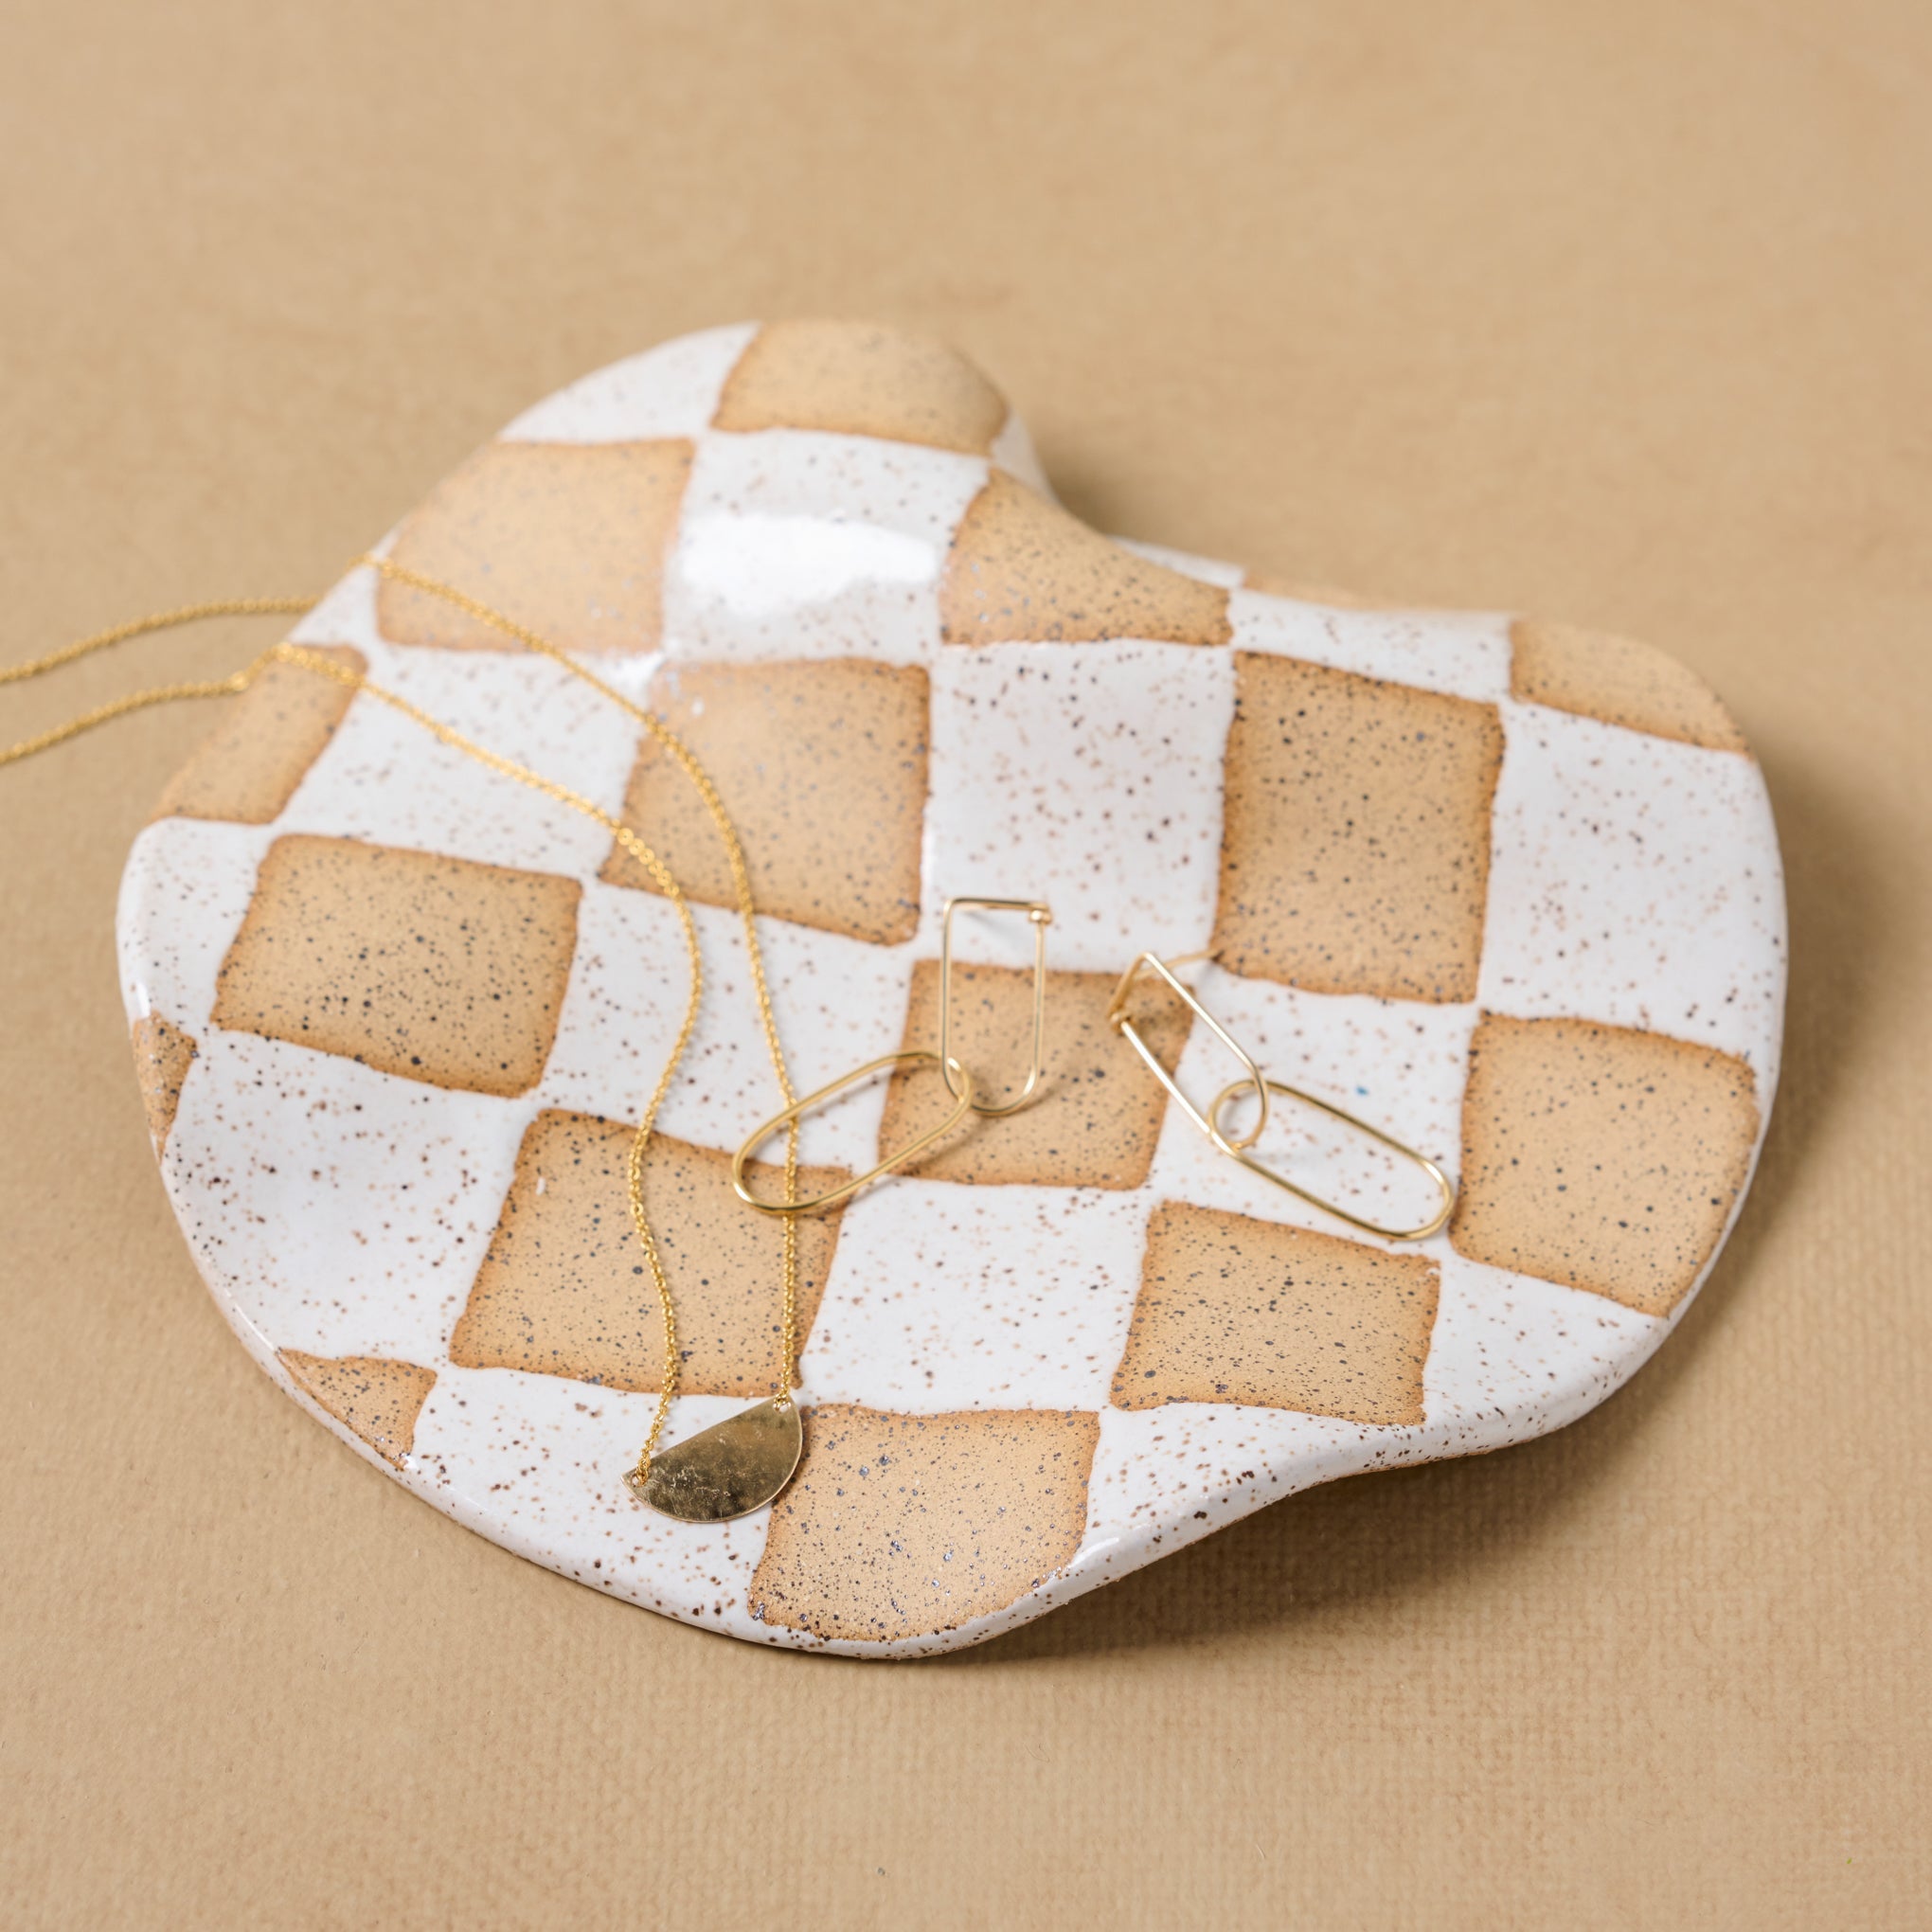 Checkered Wavy Trinket Dish holding jewelry On sale for $33.60, discounted from $42.00